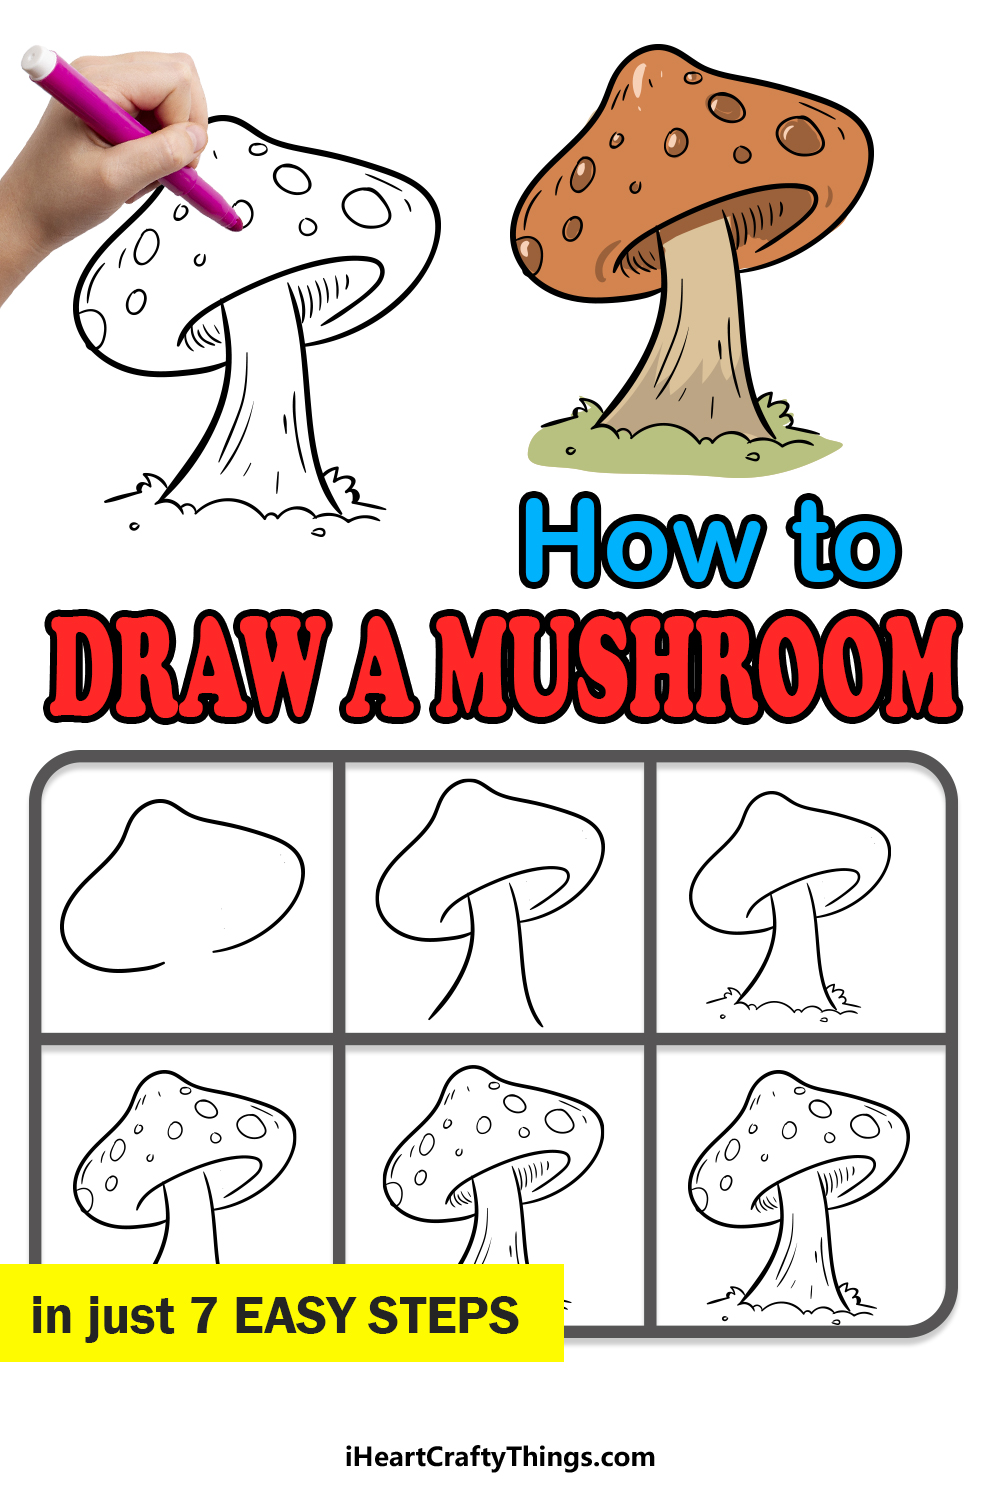 how to draw a mushroom in 7 easy steps